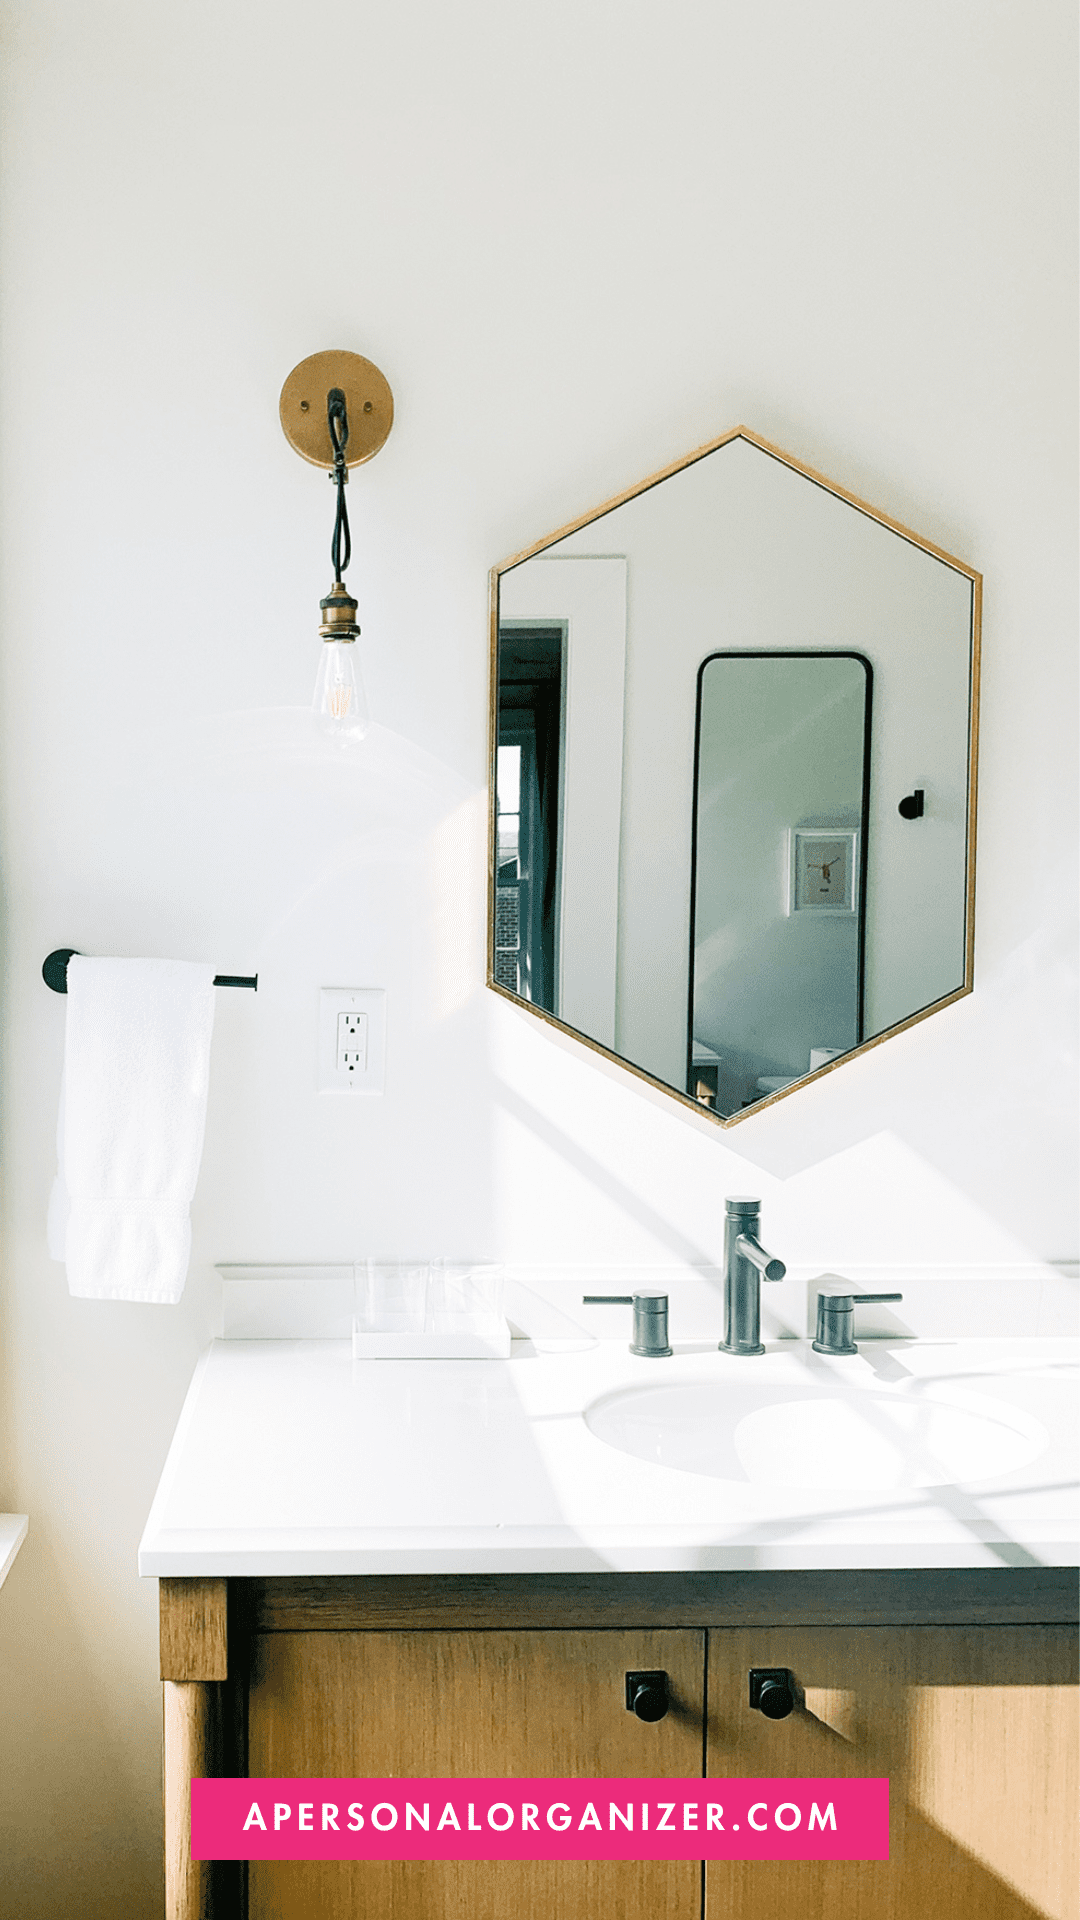 How to Organize Your Bathroom Cabinets: A Step-by-Step Guide